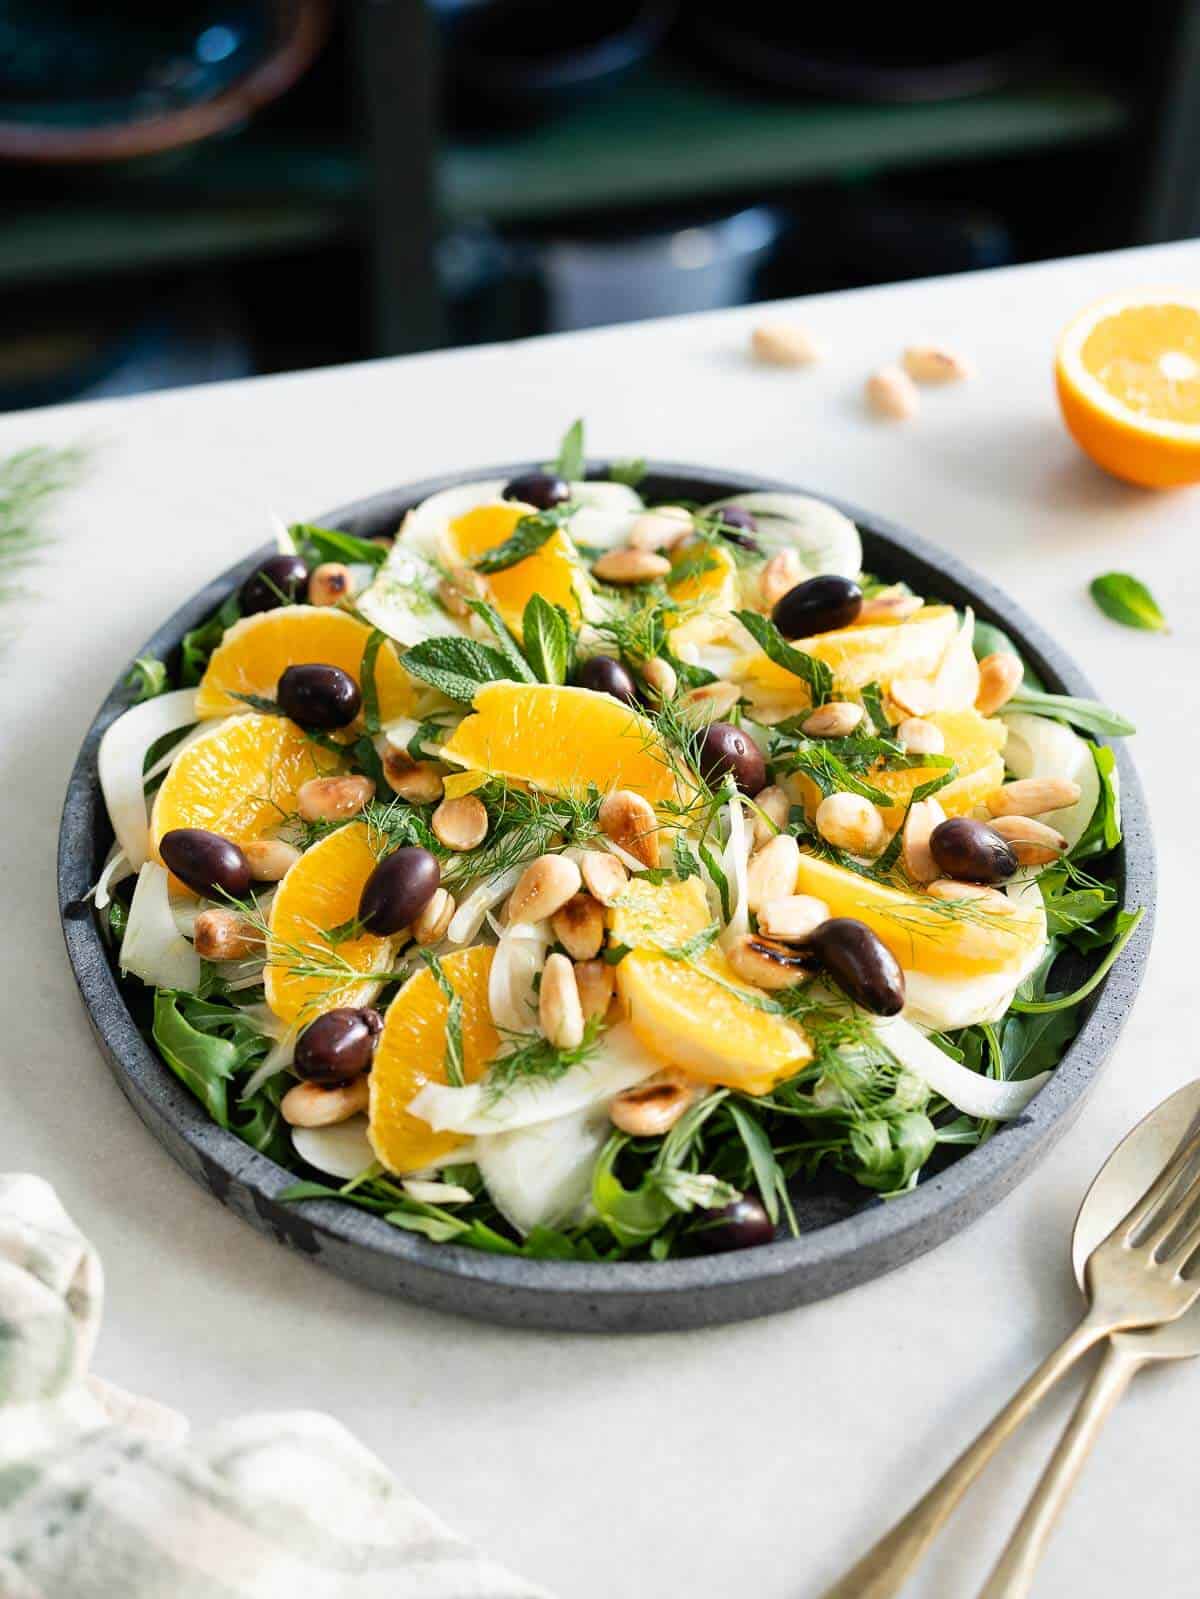 topping the salad with toasted almonds and black olives.